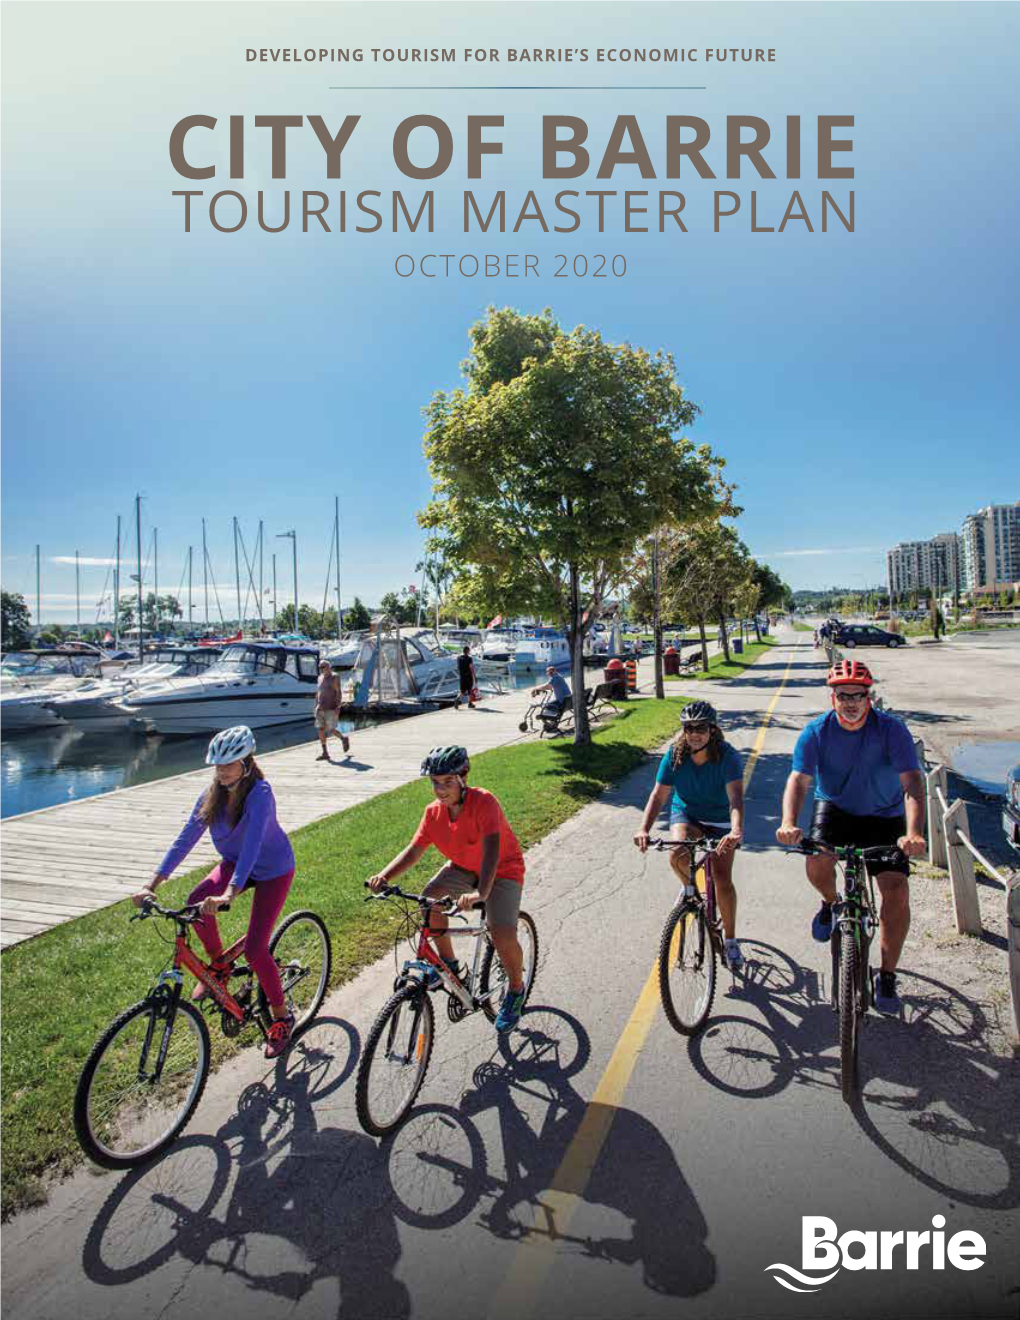 CITY of BARRIE TOURISM MASTER PLAN OCTOBER 2020 the Tourism Master Plan Was Researched and Conducted by FLOOR13 and Its Partners, KWL Advisory and GM Event Inc